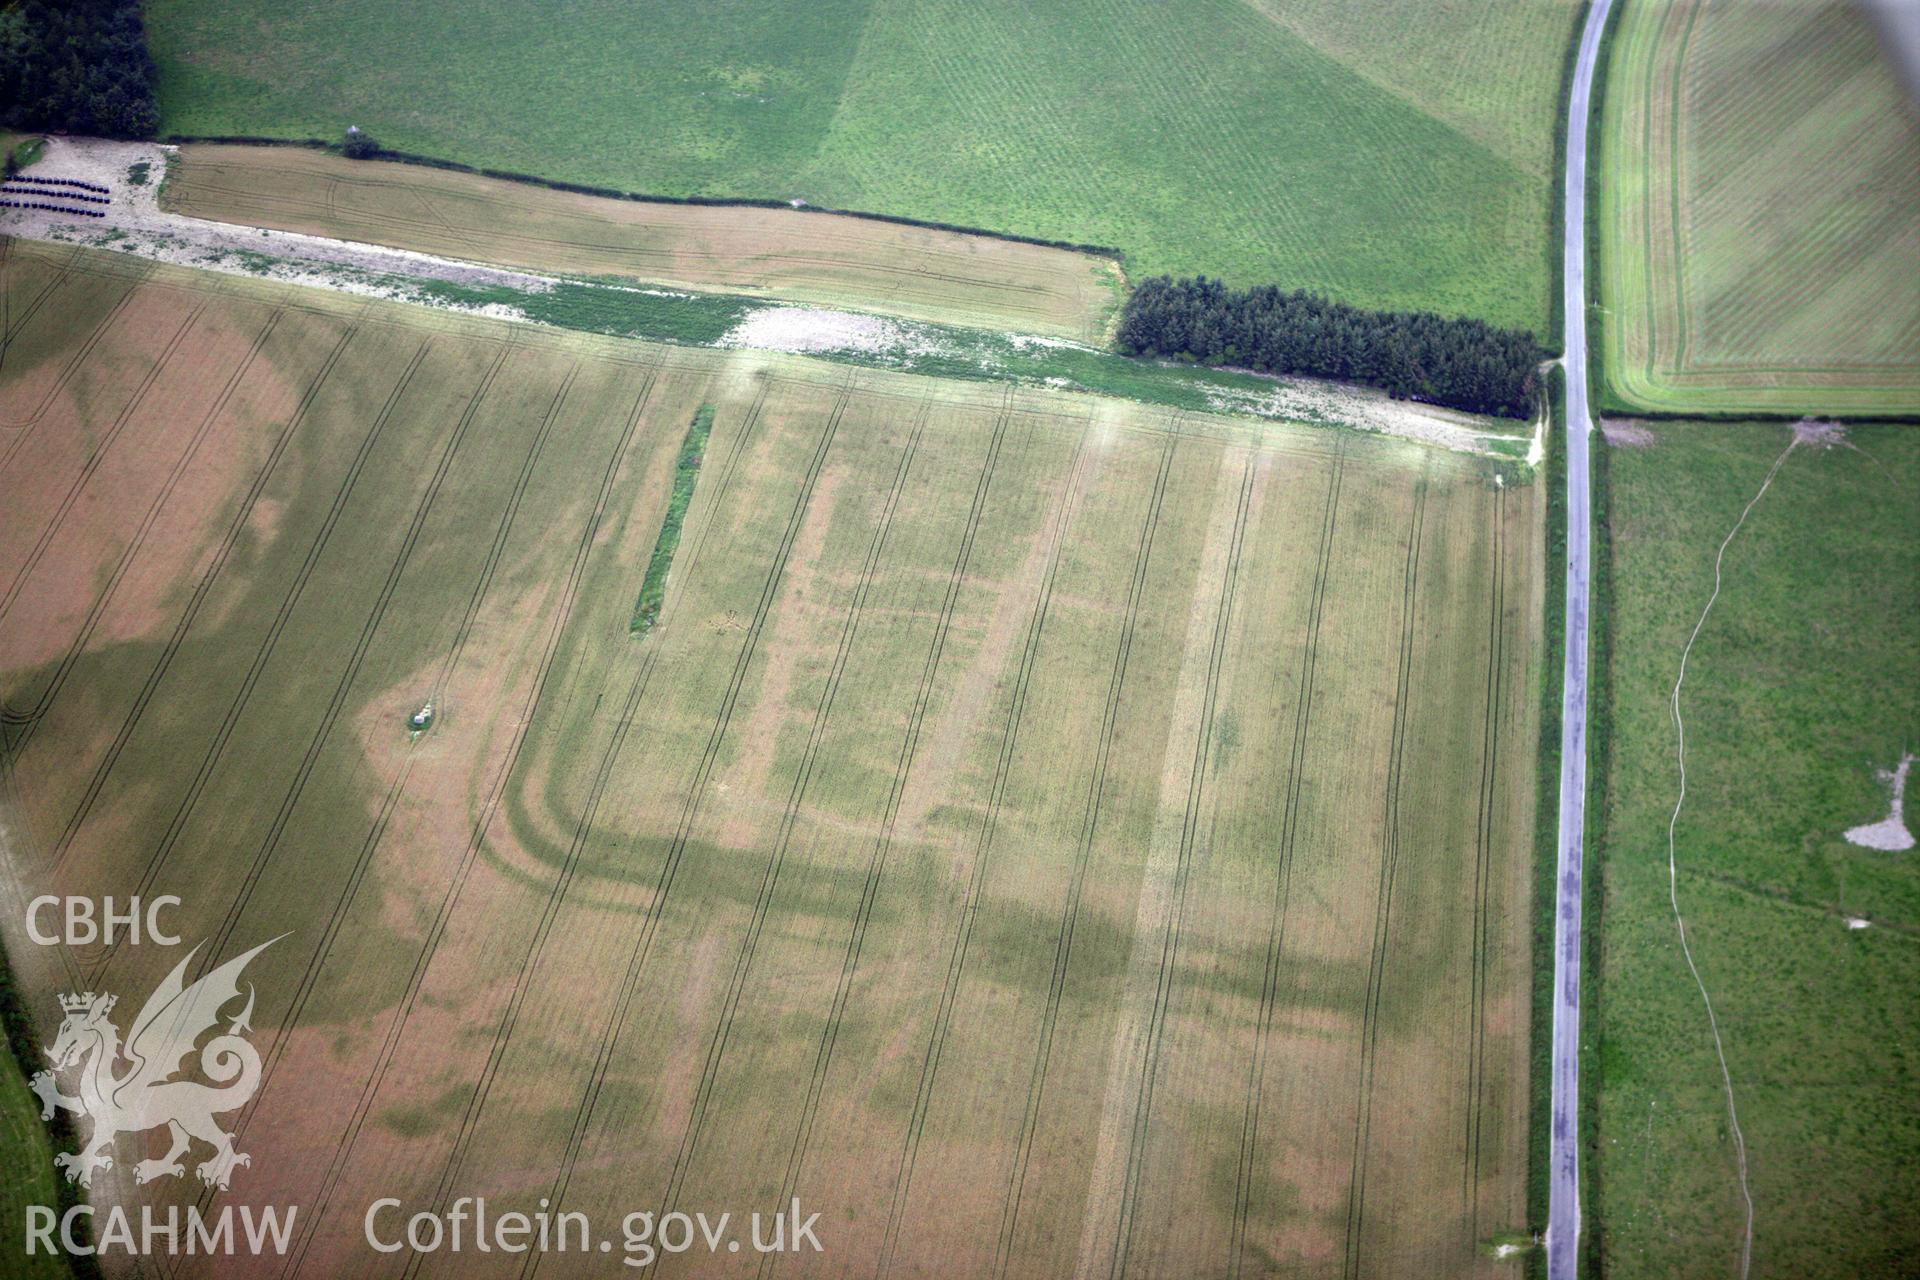 RCAHMW colour oblique photograph of Forden Gaer Roman settlement. Taken by Toby Driver and Oliver Davies on 27/07/2011.